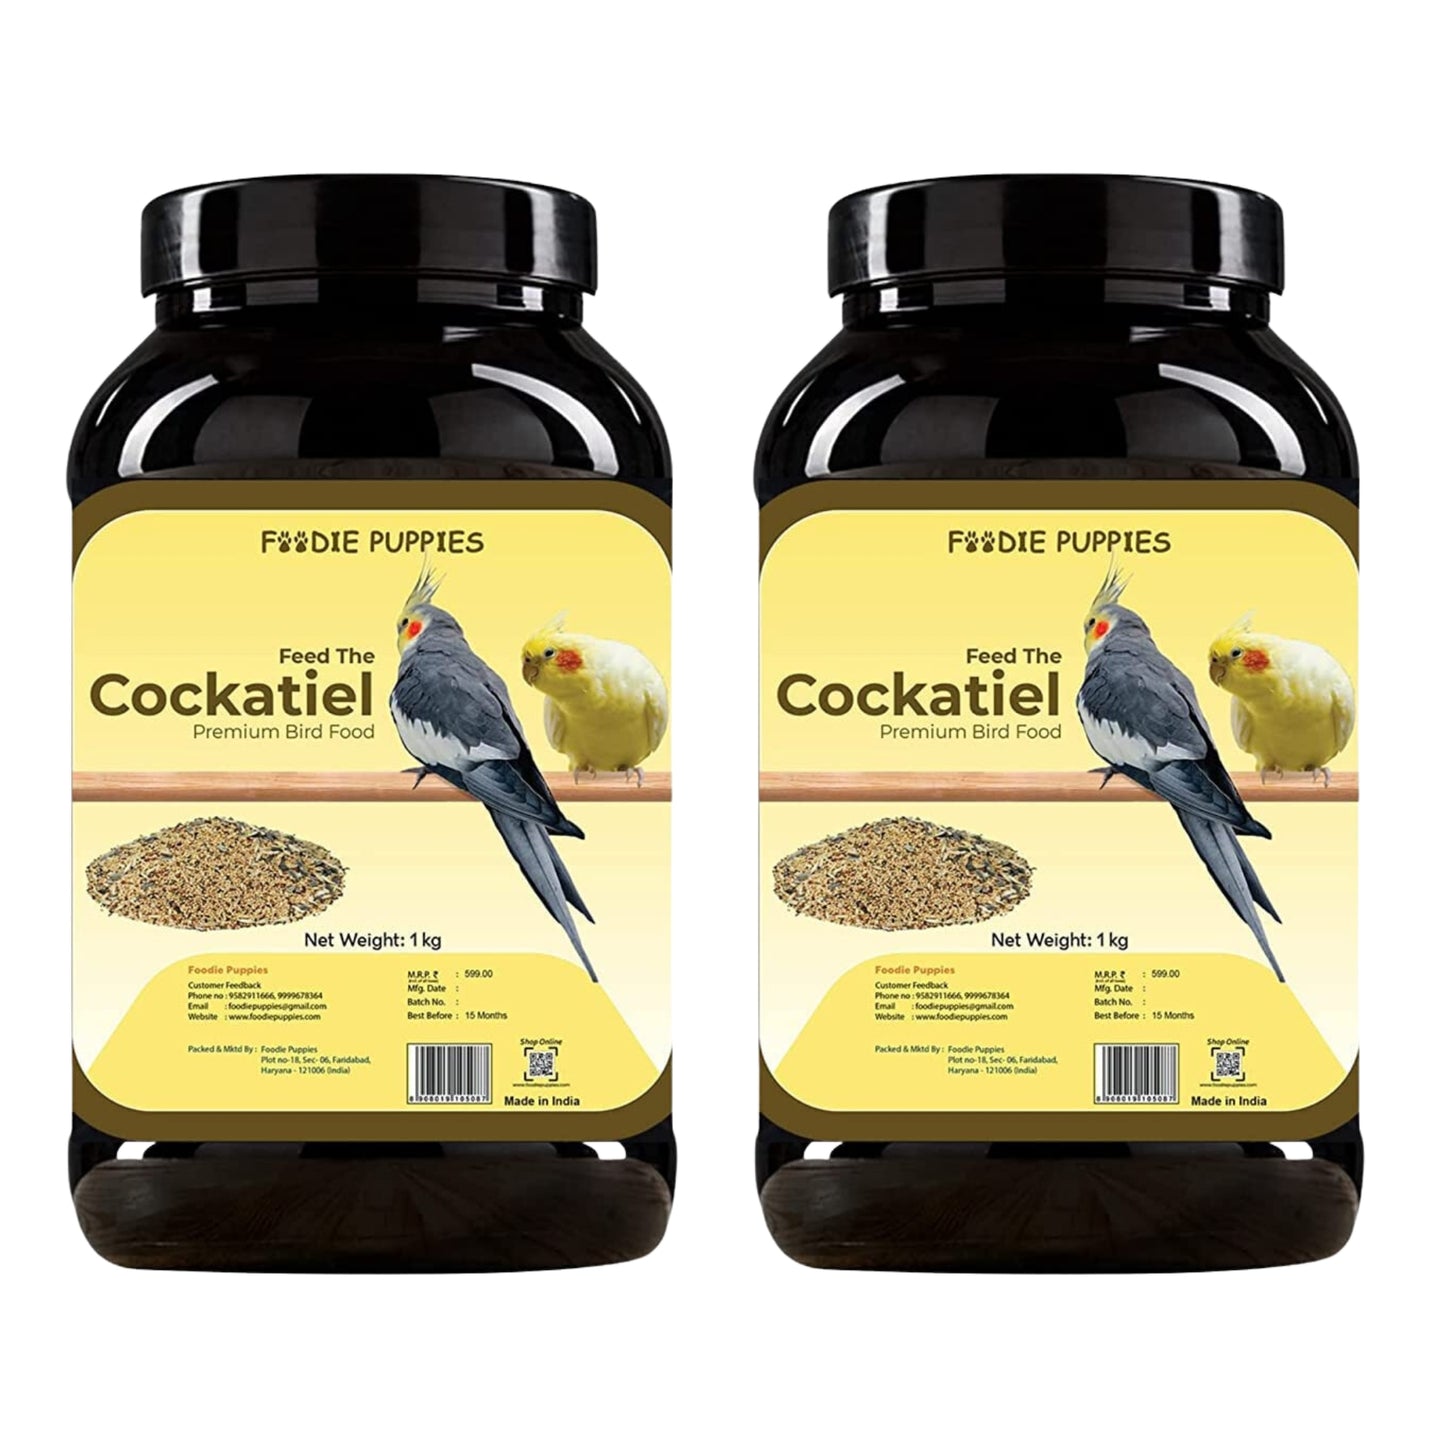 Foodie Puppies Cockatiel Seeds - 2Kg | Suitable for All Types of Birds